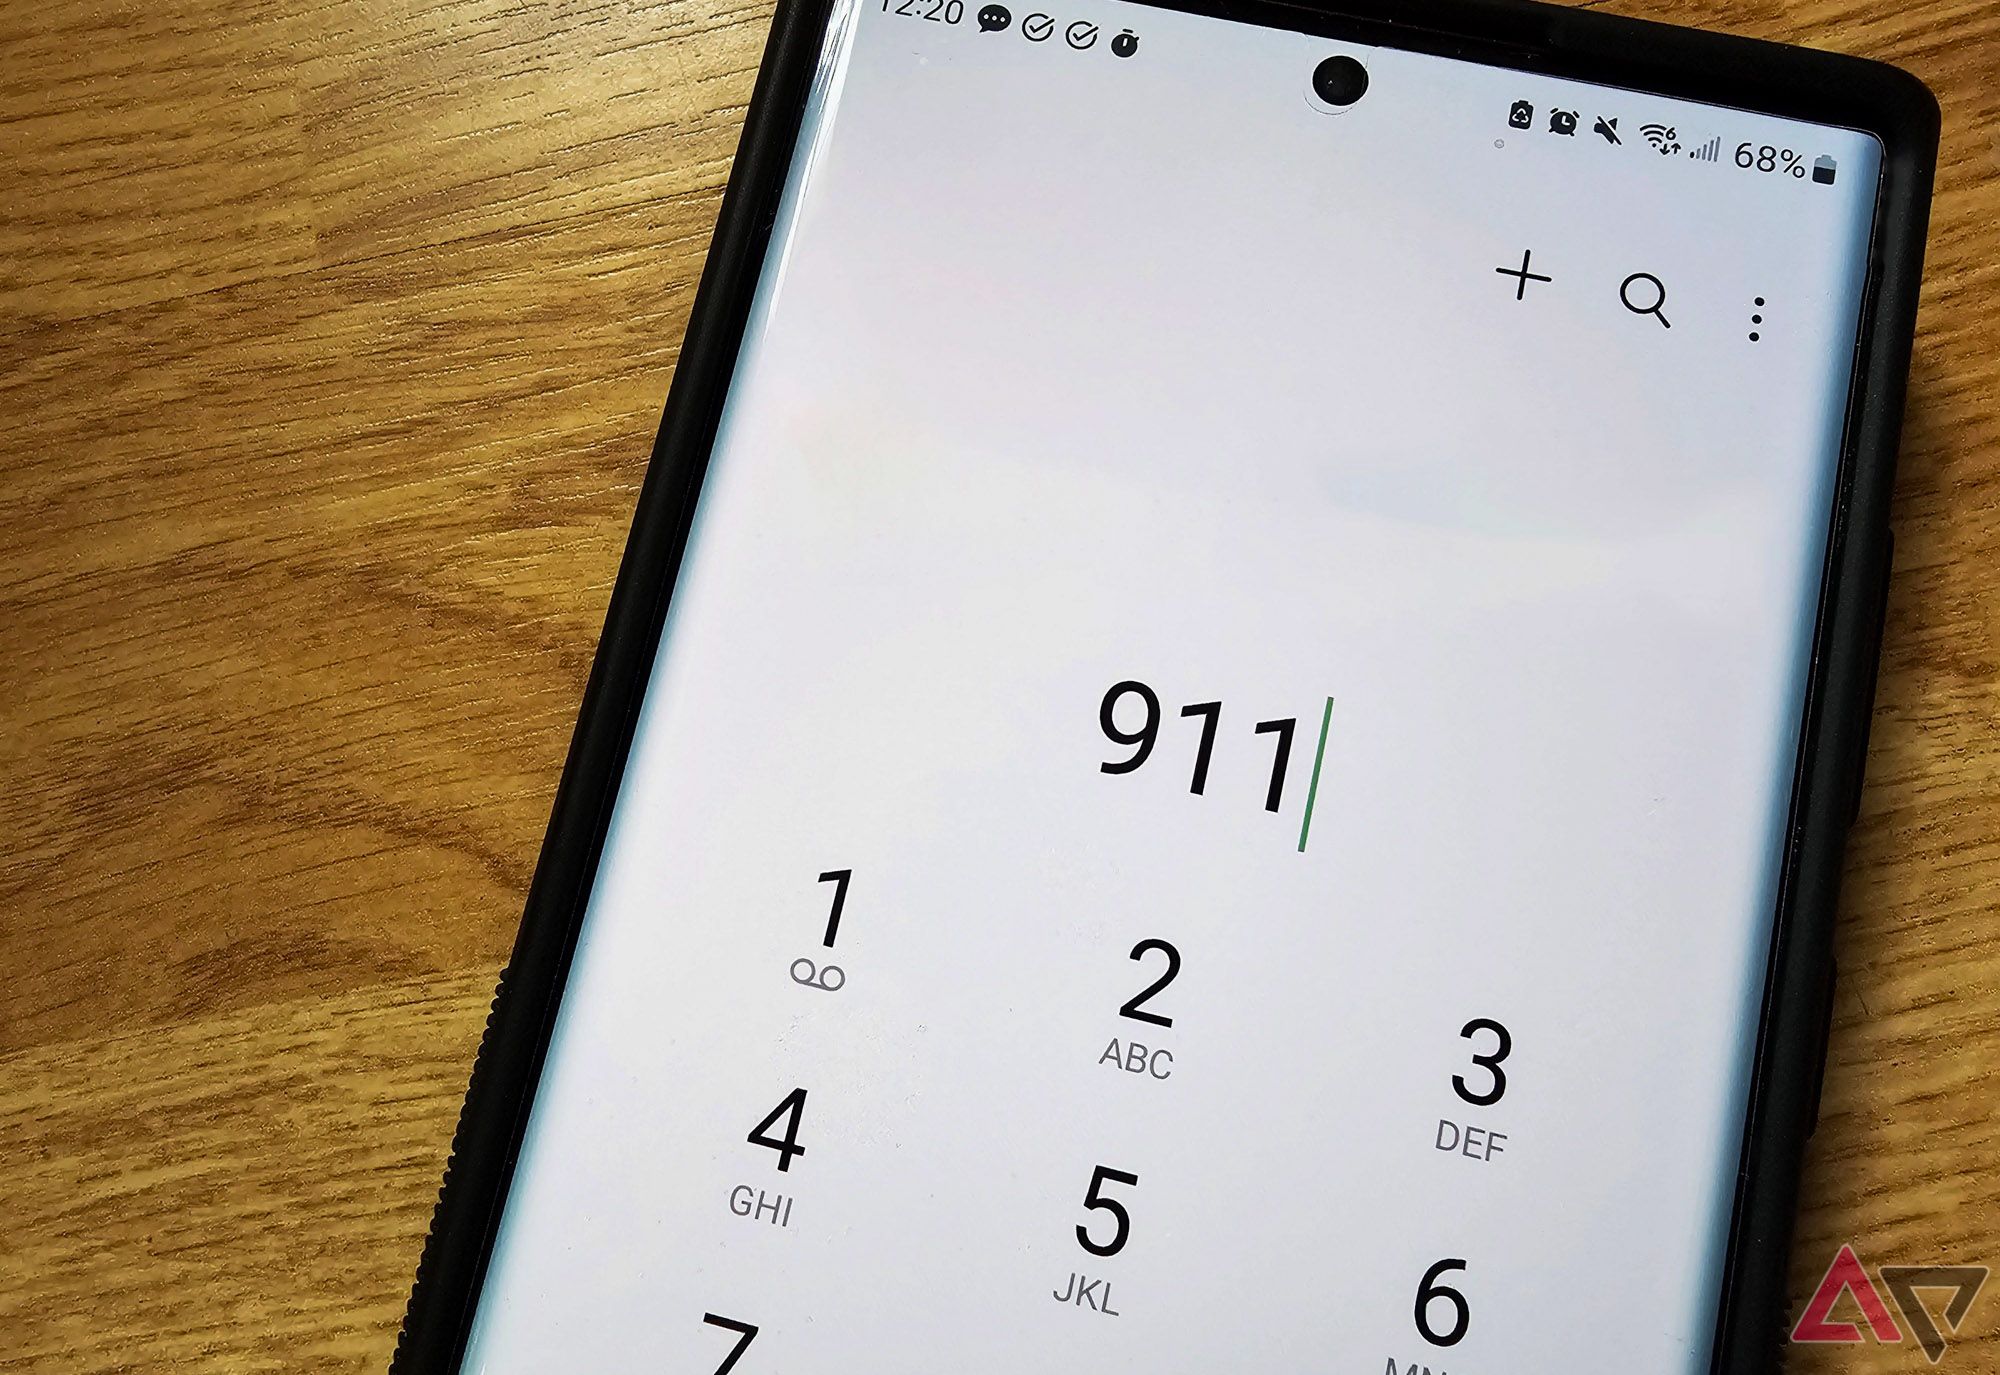 An Android phone dialing 911.